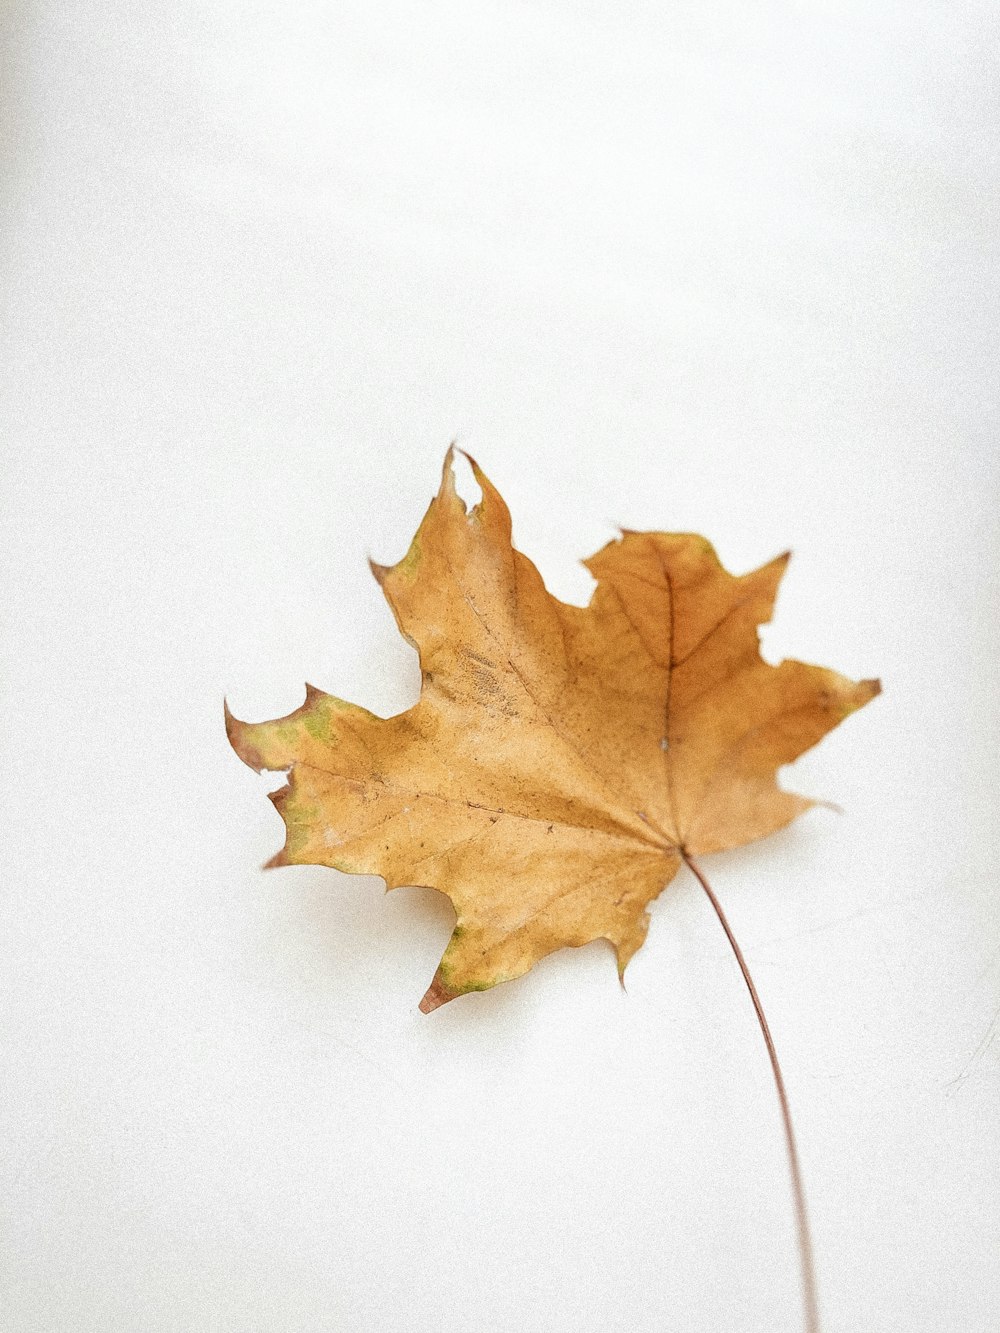 brown maple leaf on white surface